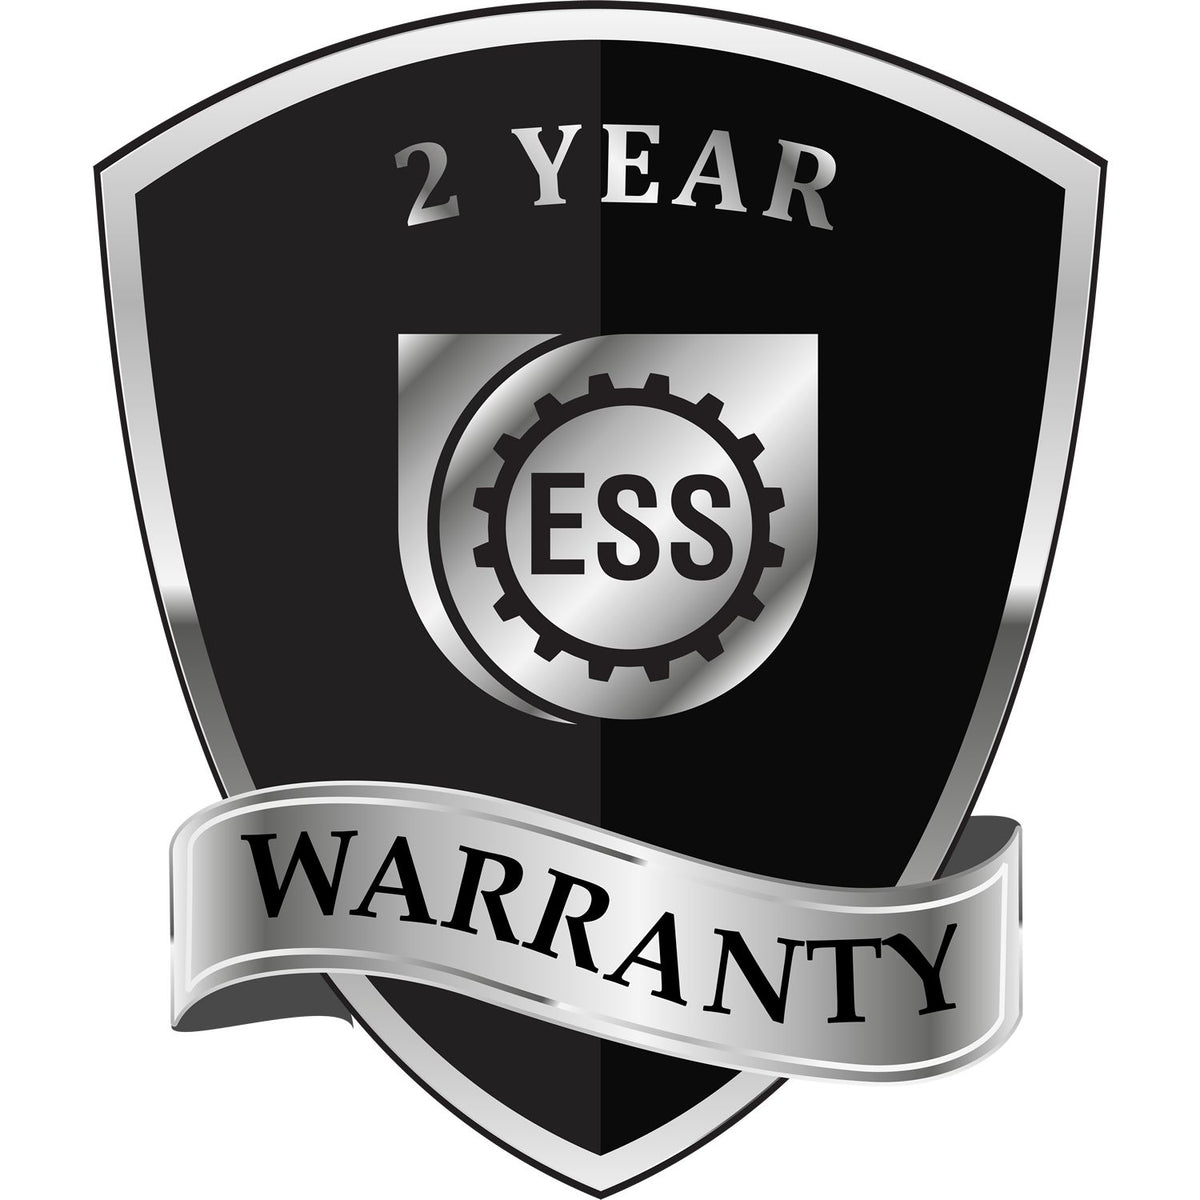 A black and silver badge or emblem showing warranty information for the Hybrid Maryland Geologist Seal